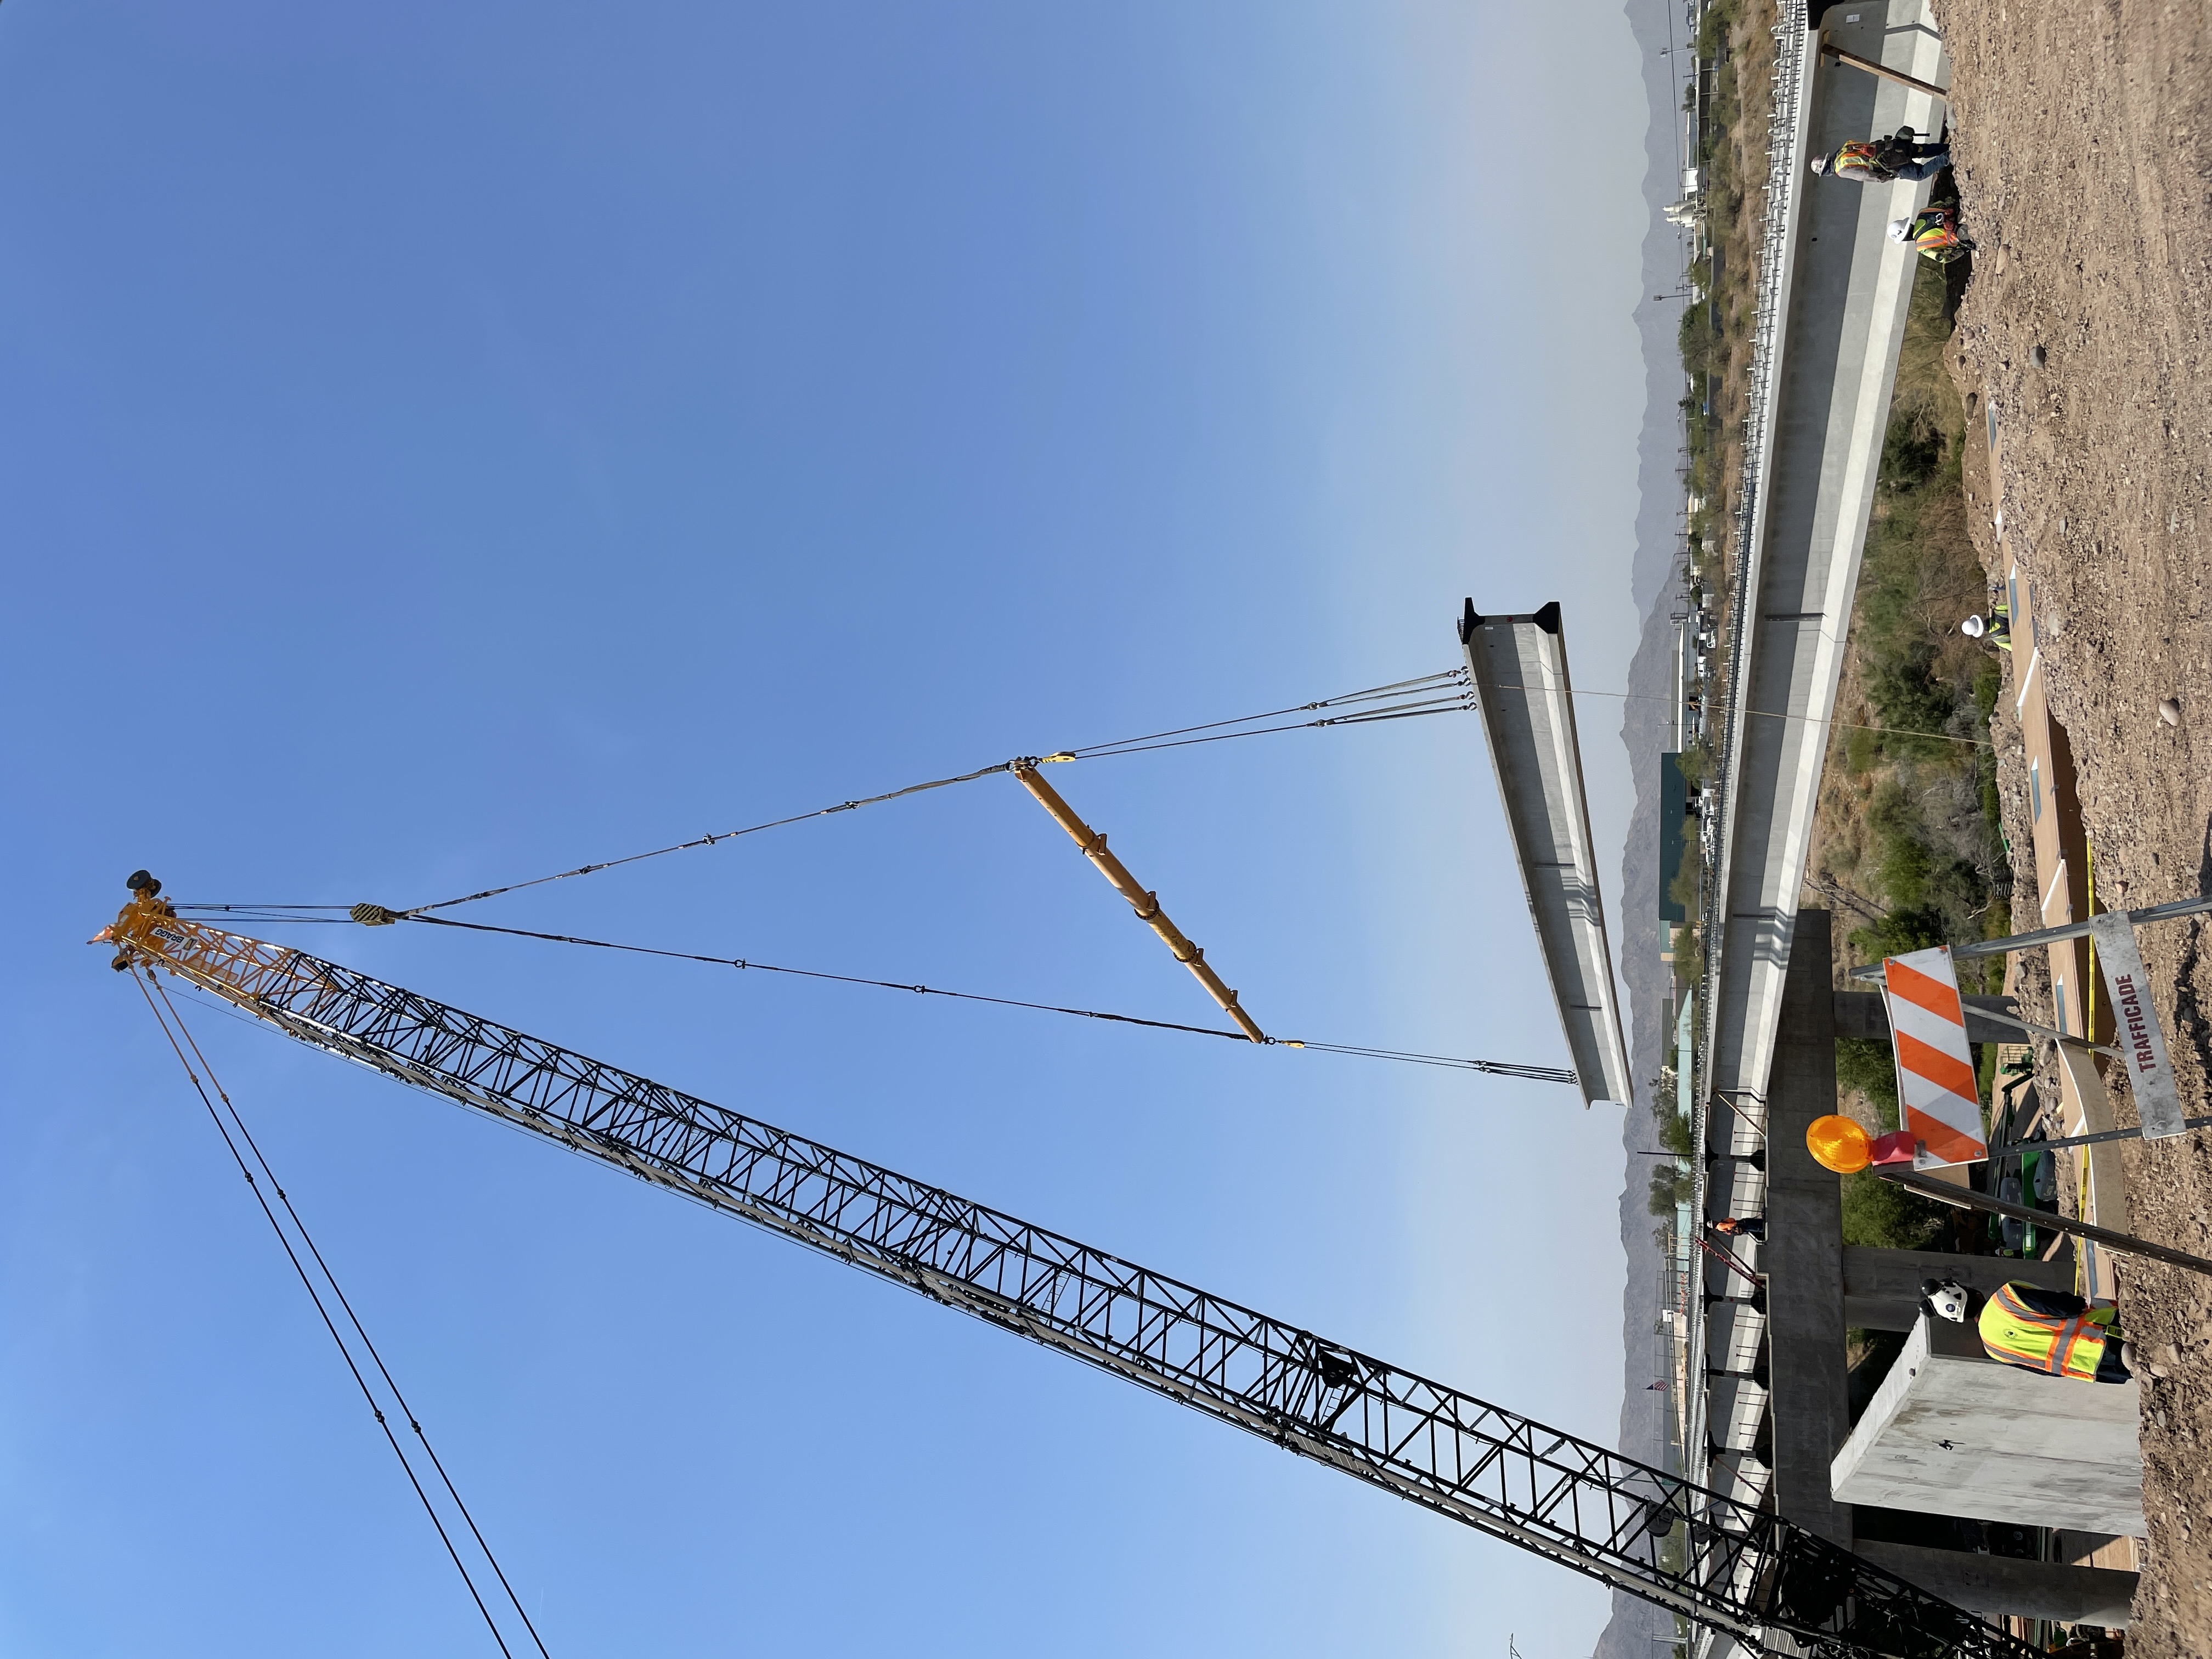 Crane lifts girder into place on north end of 7th Street Bridge over the Rio Salado riverbed